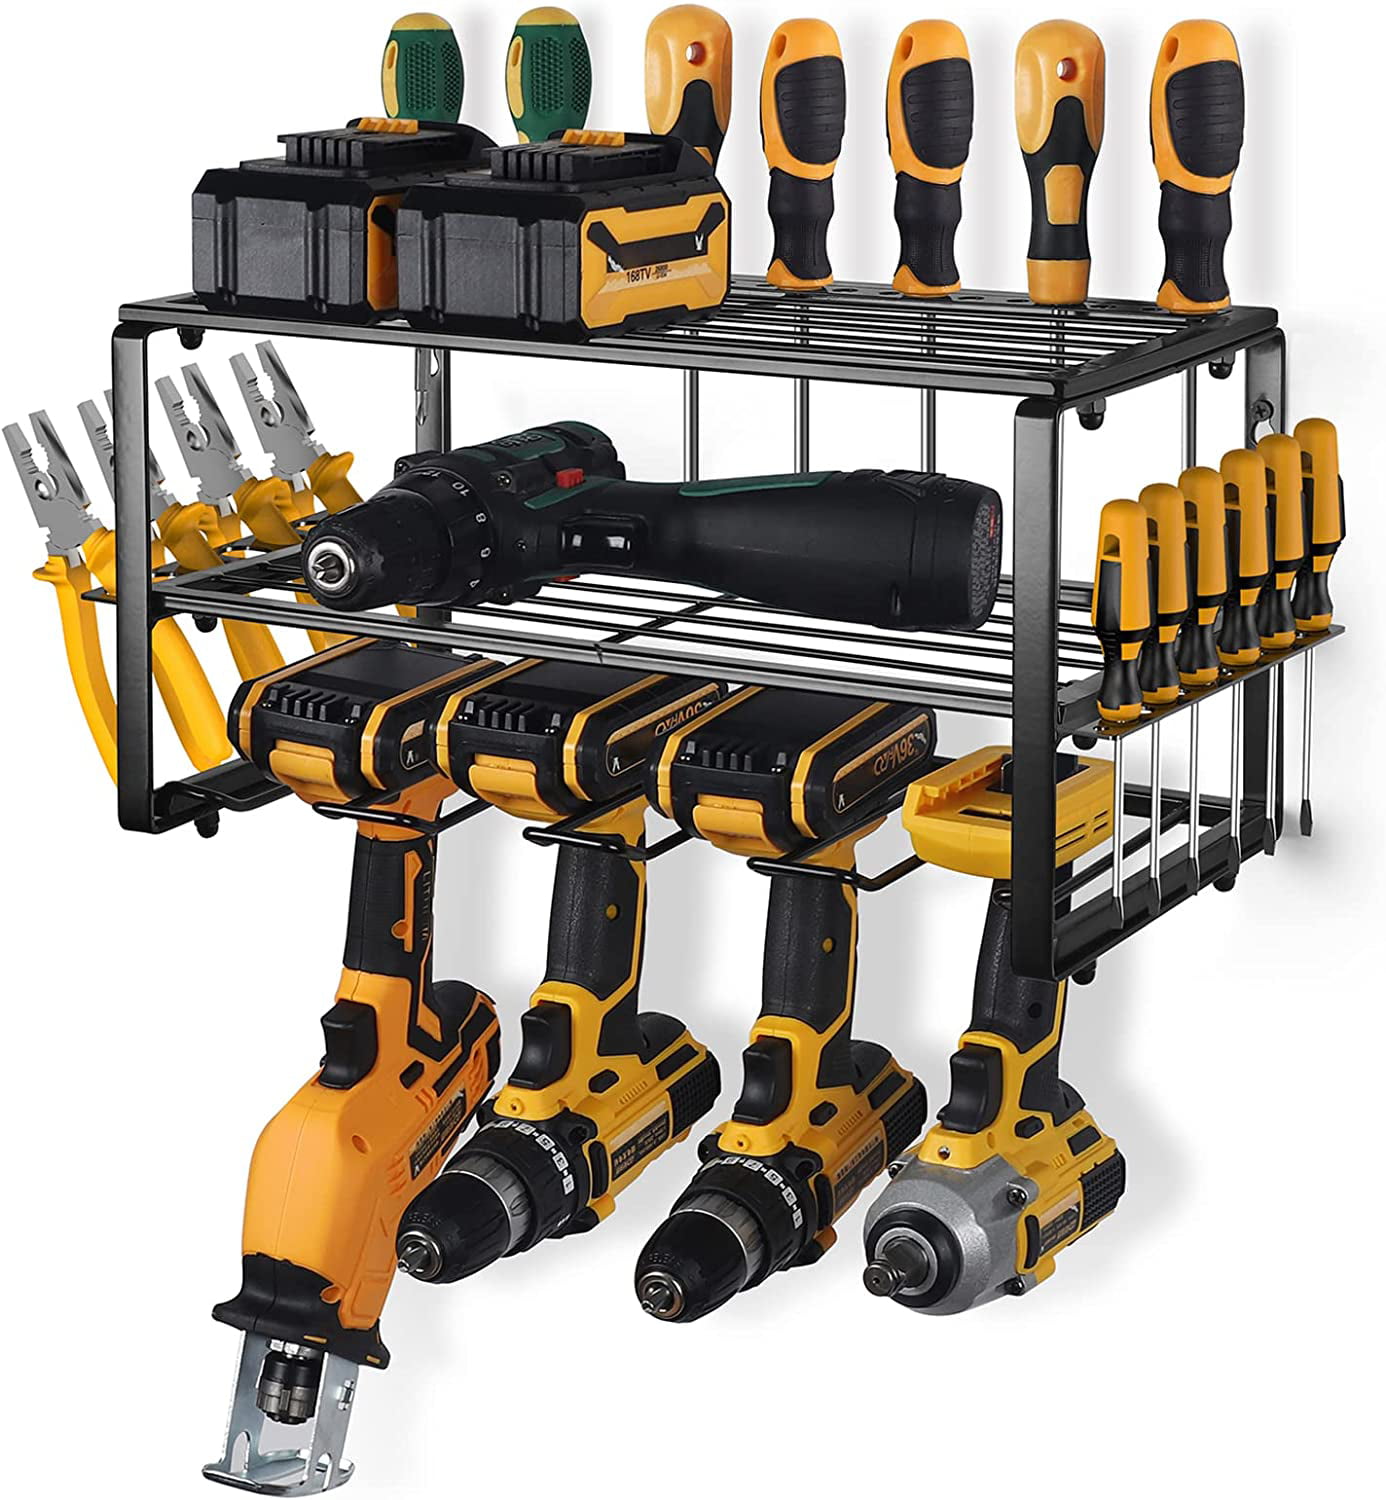 Power Tool Organizer Power Tool Storage Rack Heavy Duty Floating Tool Shelf Drill Holder Wall Mount Drill Charging Station with 4 Hanging Slots for Cordless Drill Workshop Garage Organization 